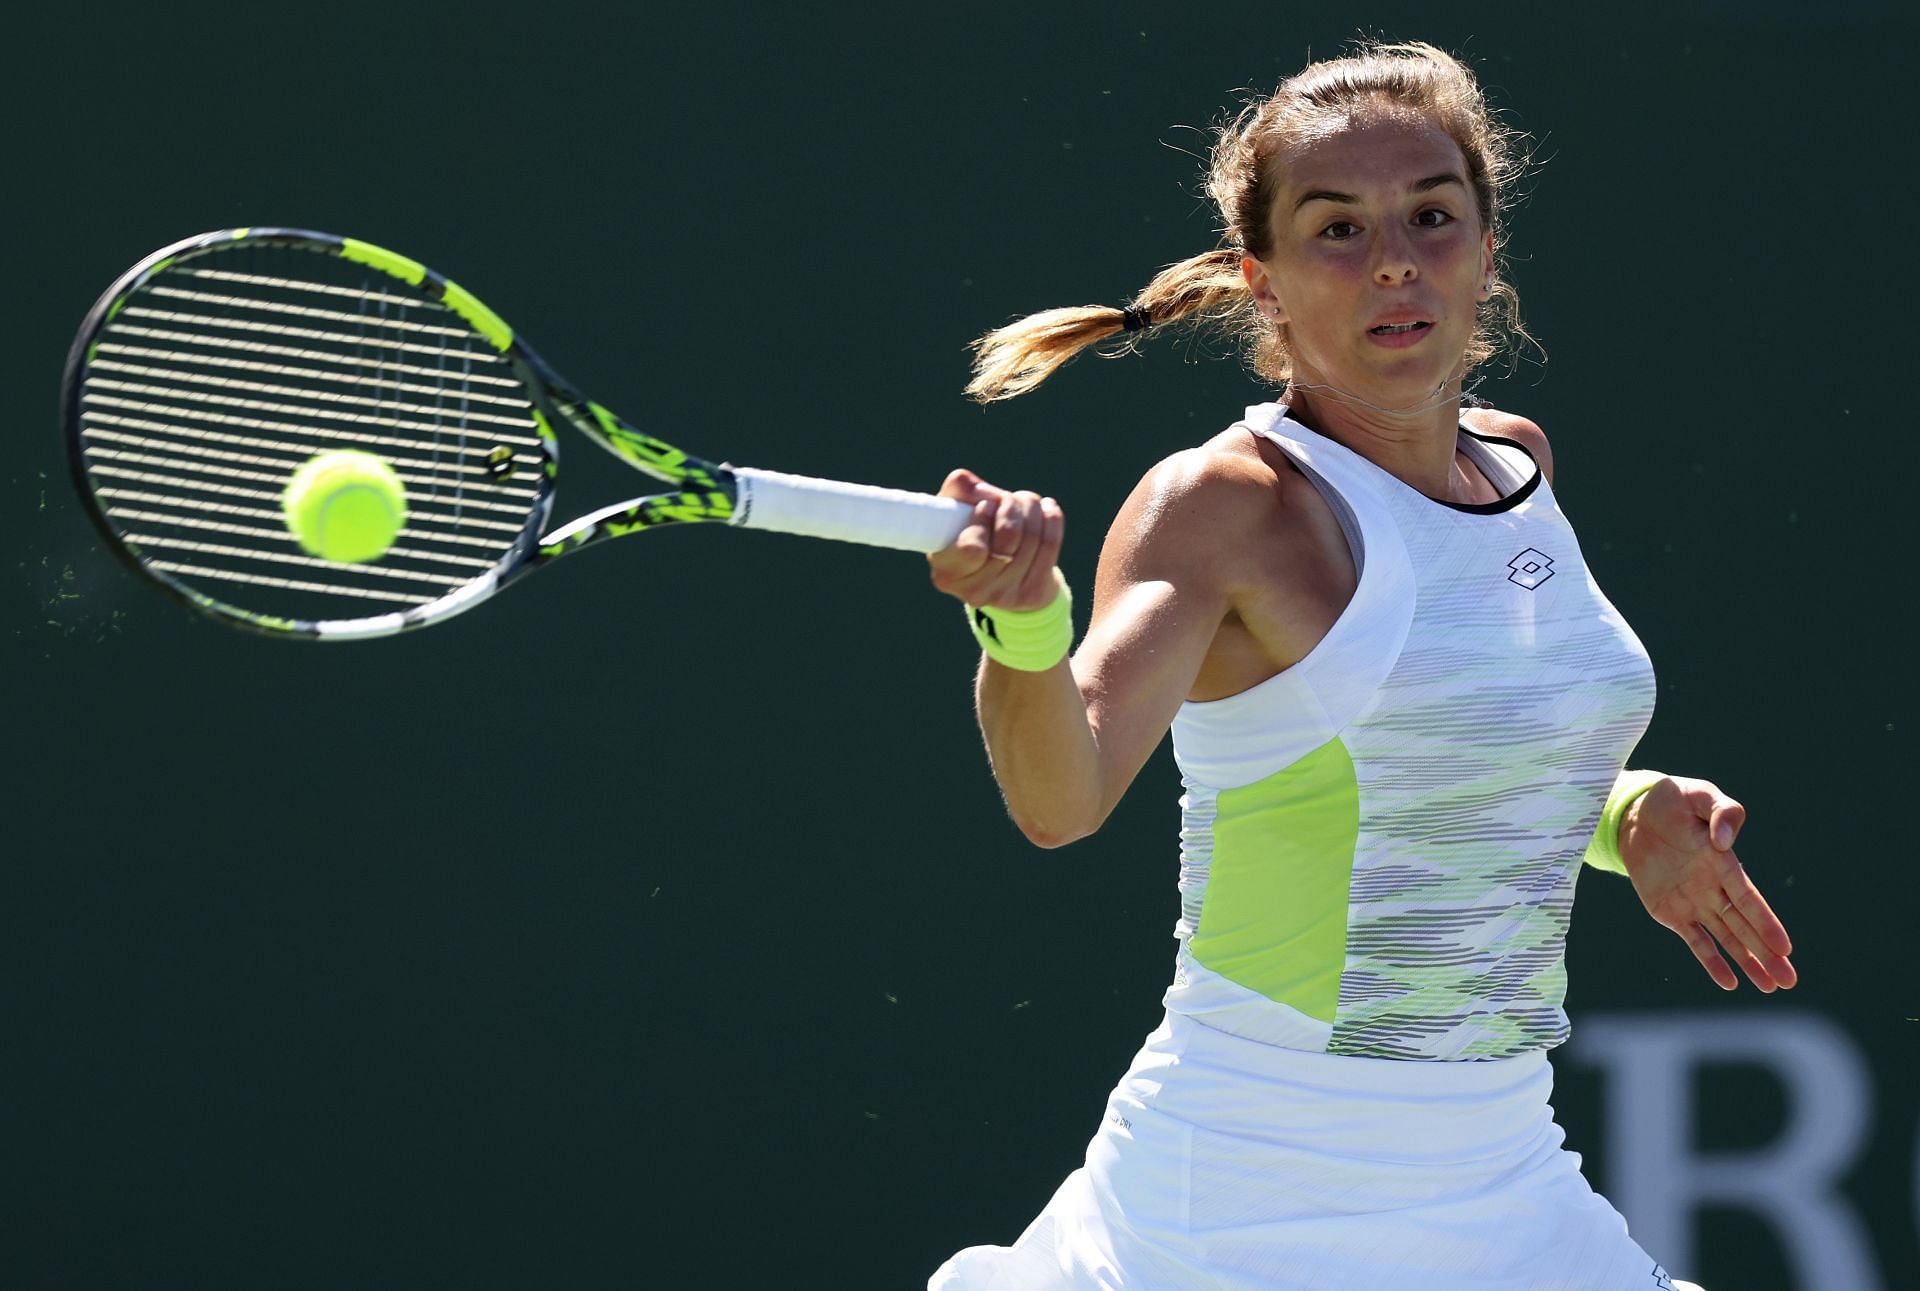 Lucia Bronzetti in action at the BNP Paribas Open